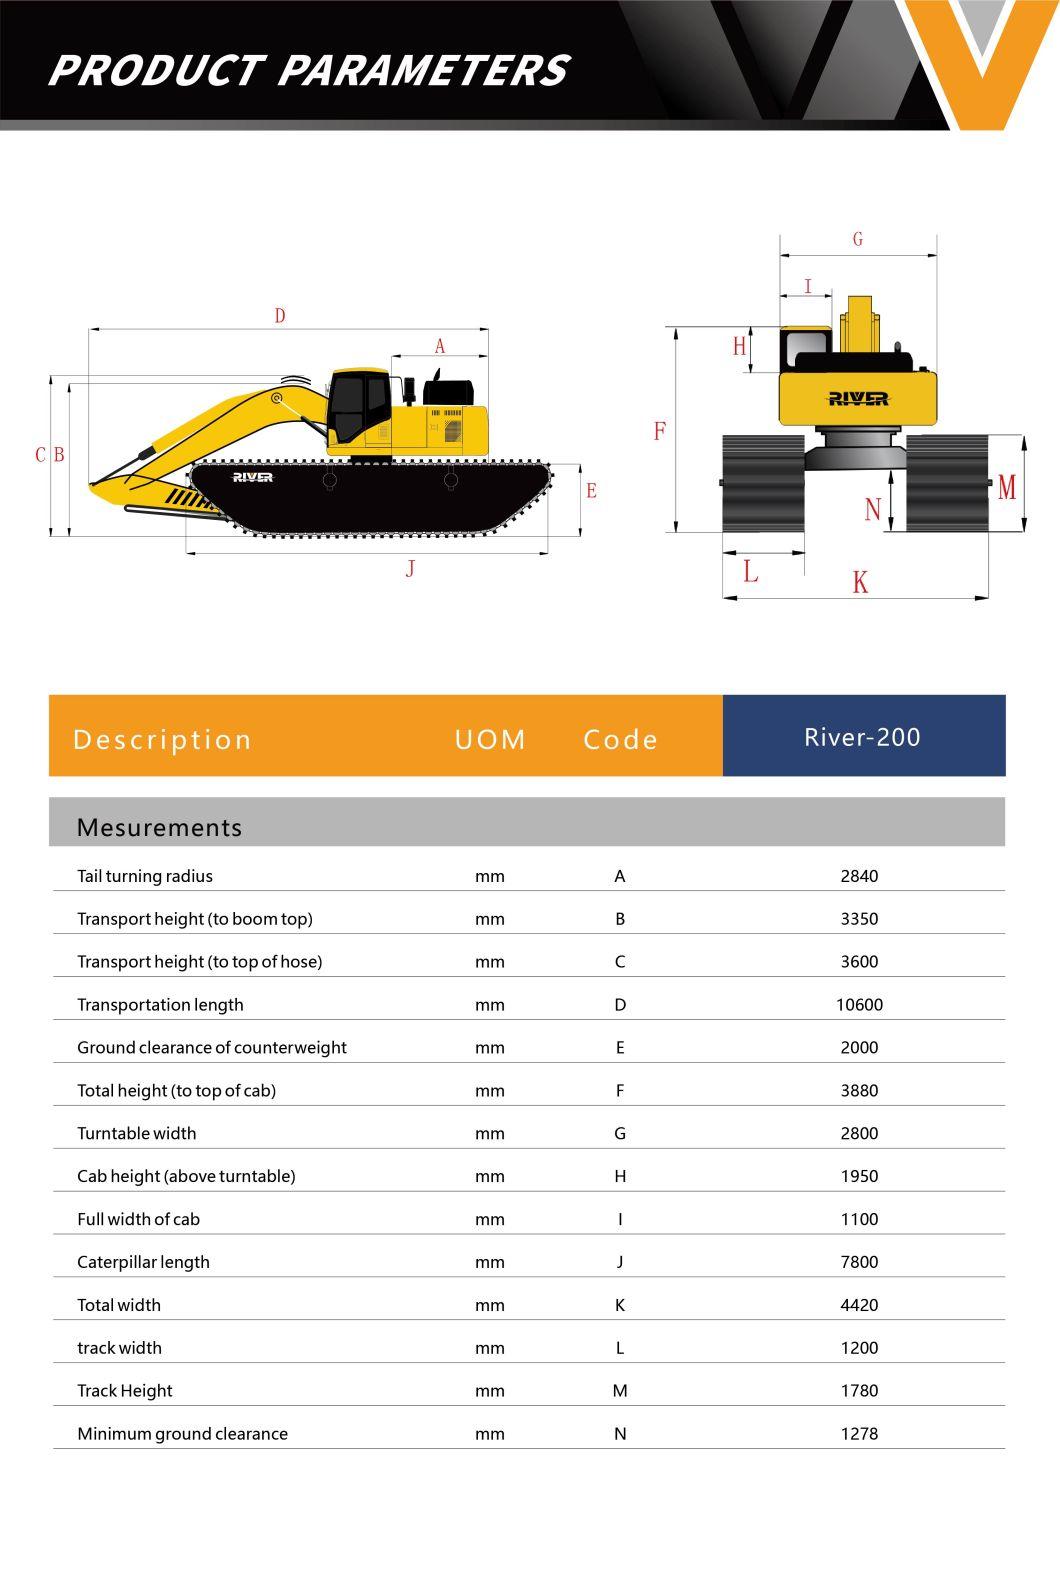 Used Amphibious Excavator Cat 320c with Customized Pontoon Undercarriage and High Quality Long Reach Boom Arm Factory Price